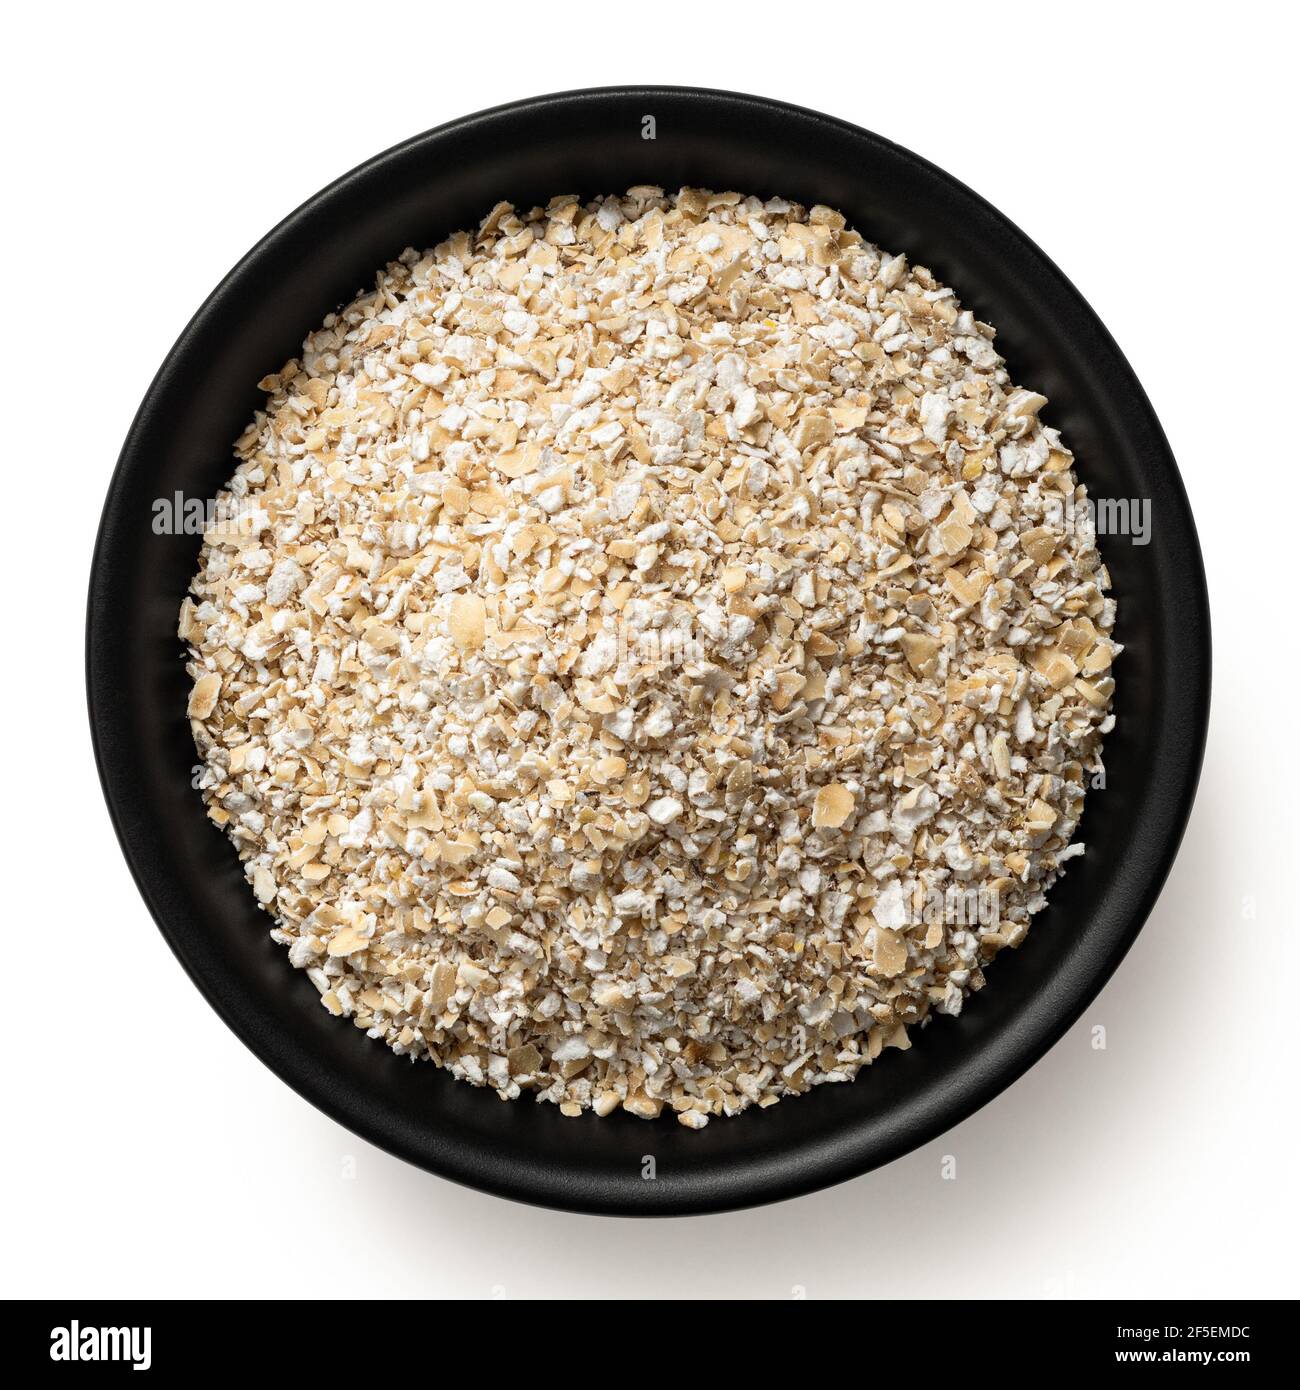 Uncooked coarse oatmeal in a black ceramic bowl isolated on white. Top view. Stock Photo